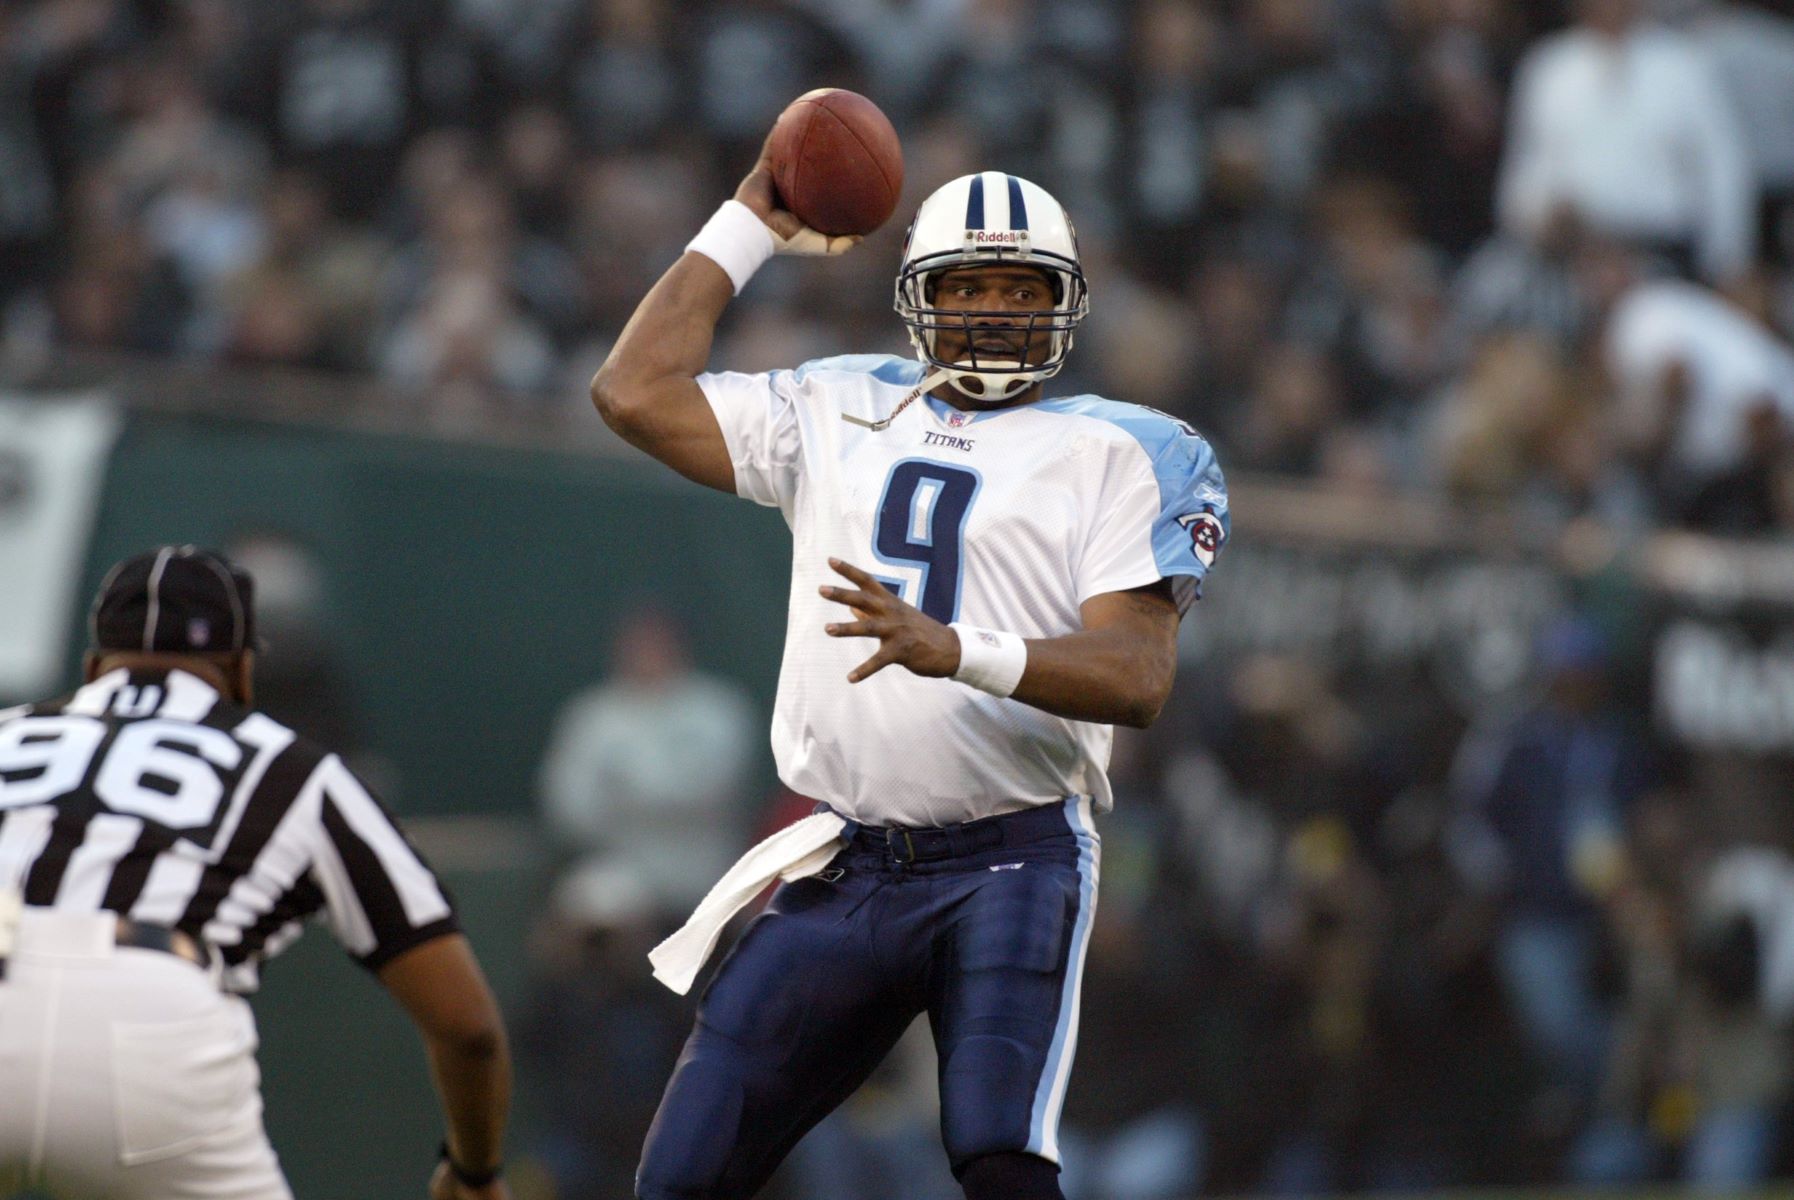 24-captivating-facts-about-steve-mcnair